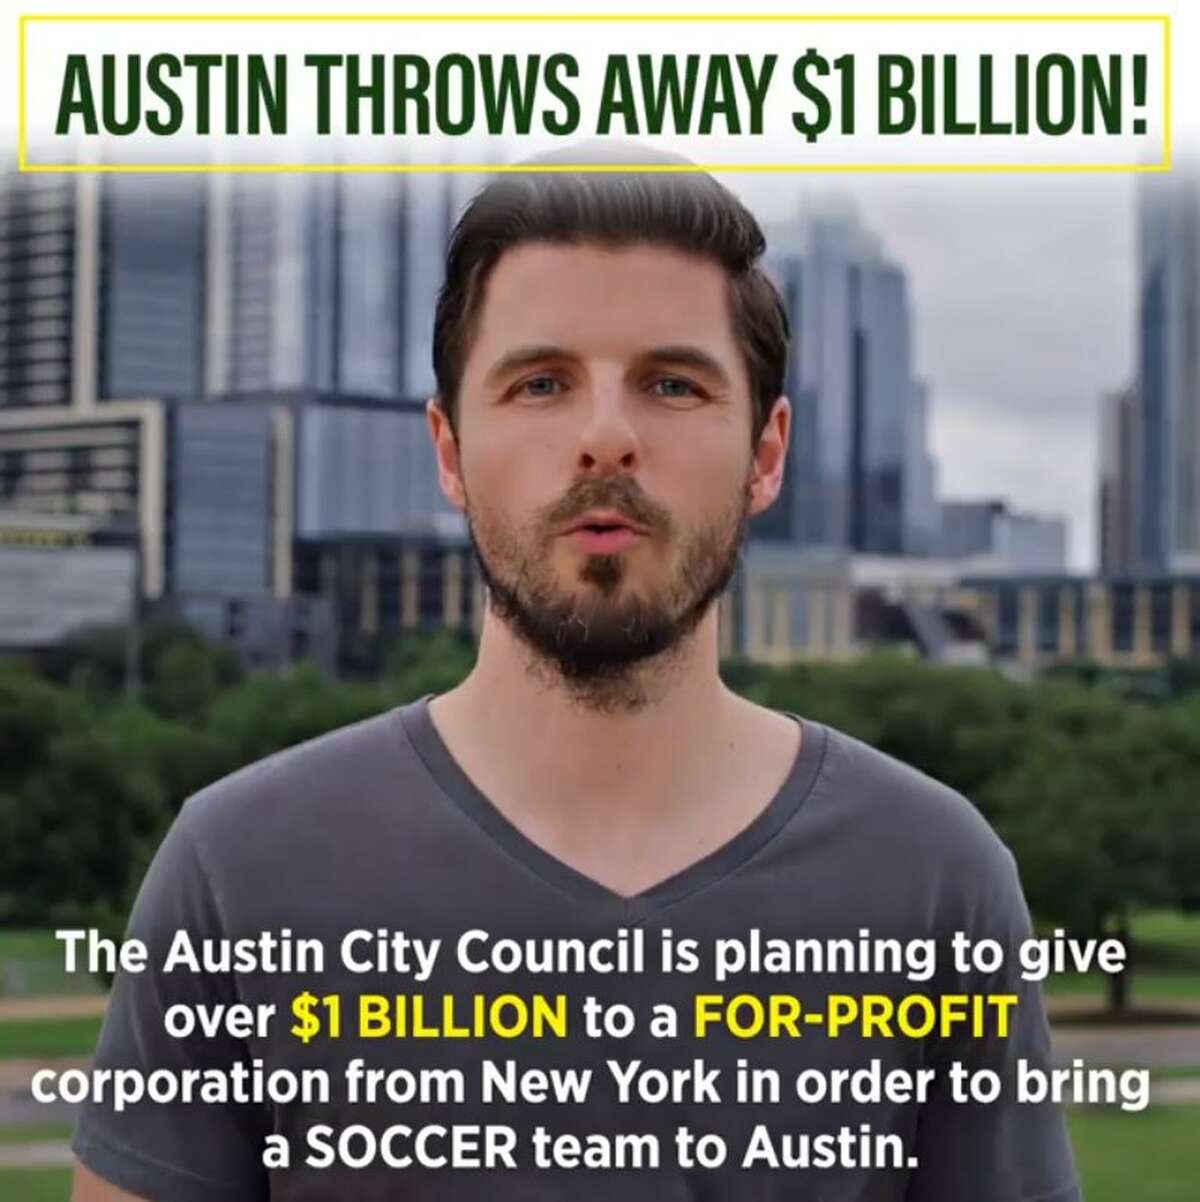 Video by opponents of Austin soccer deal claims that it is a '$1 billion giveaway.'